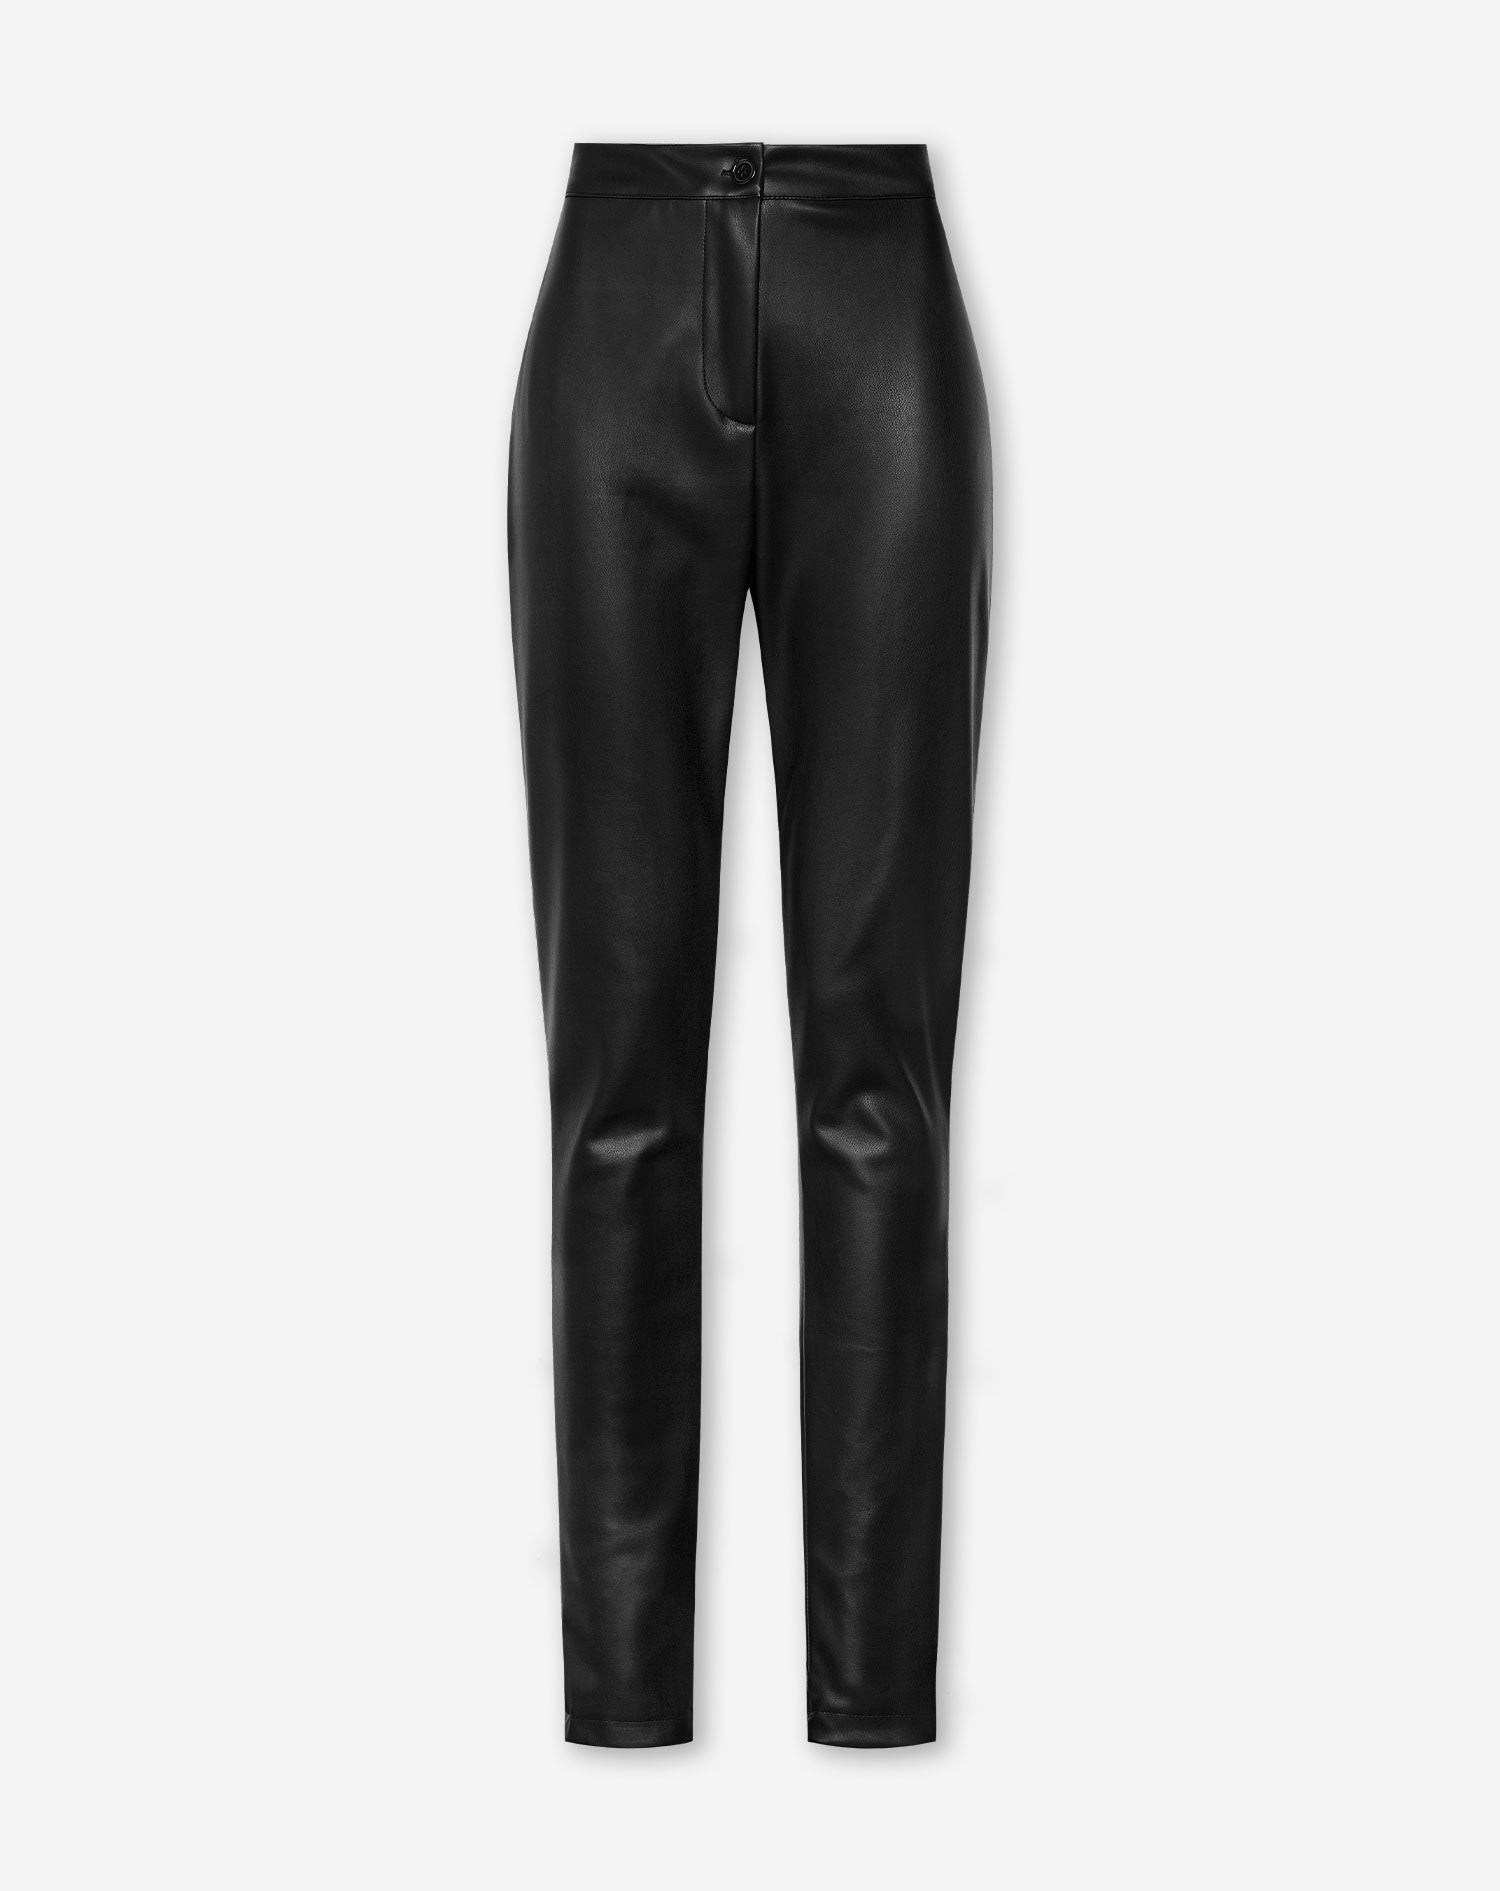 Women's High Waisted Belted Leather Look Skinny Trousers | Boohoo UK